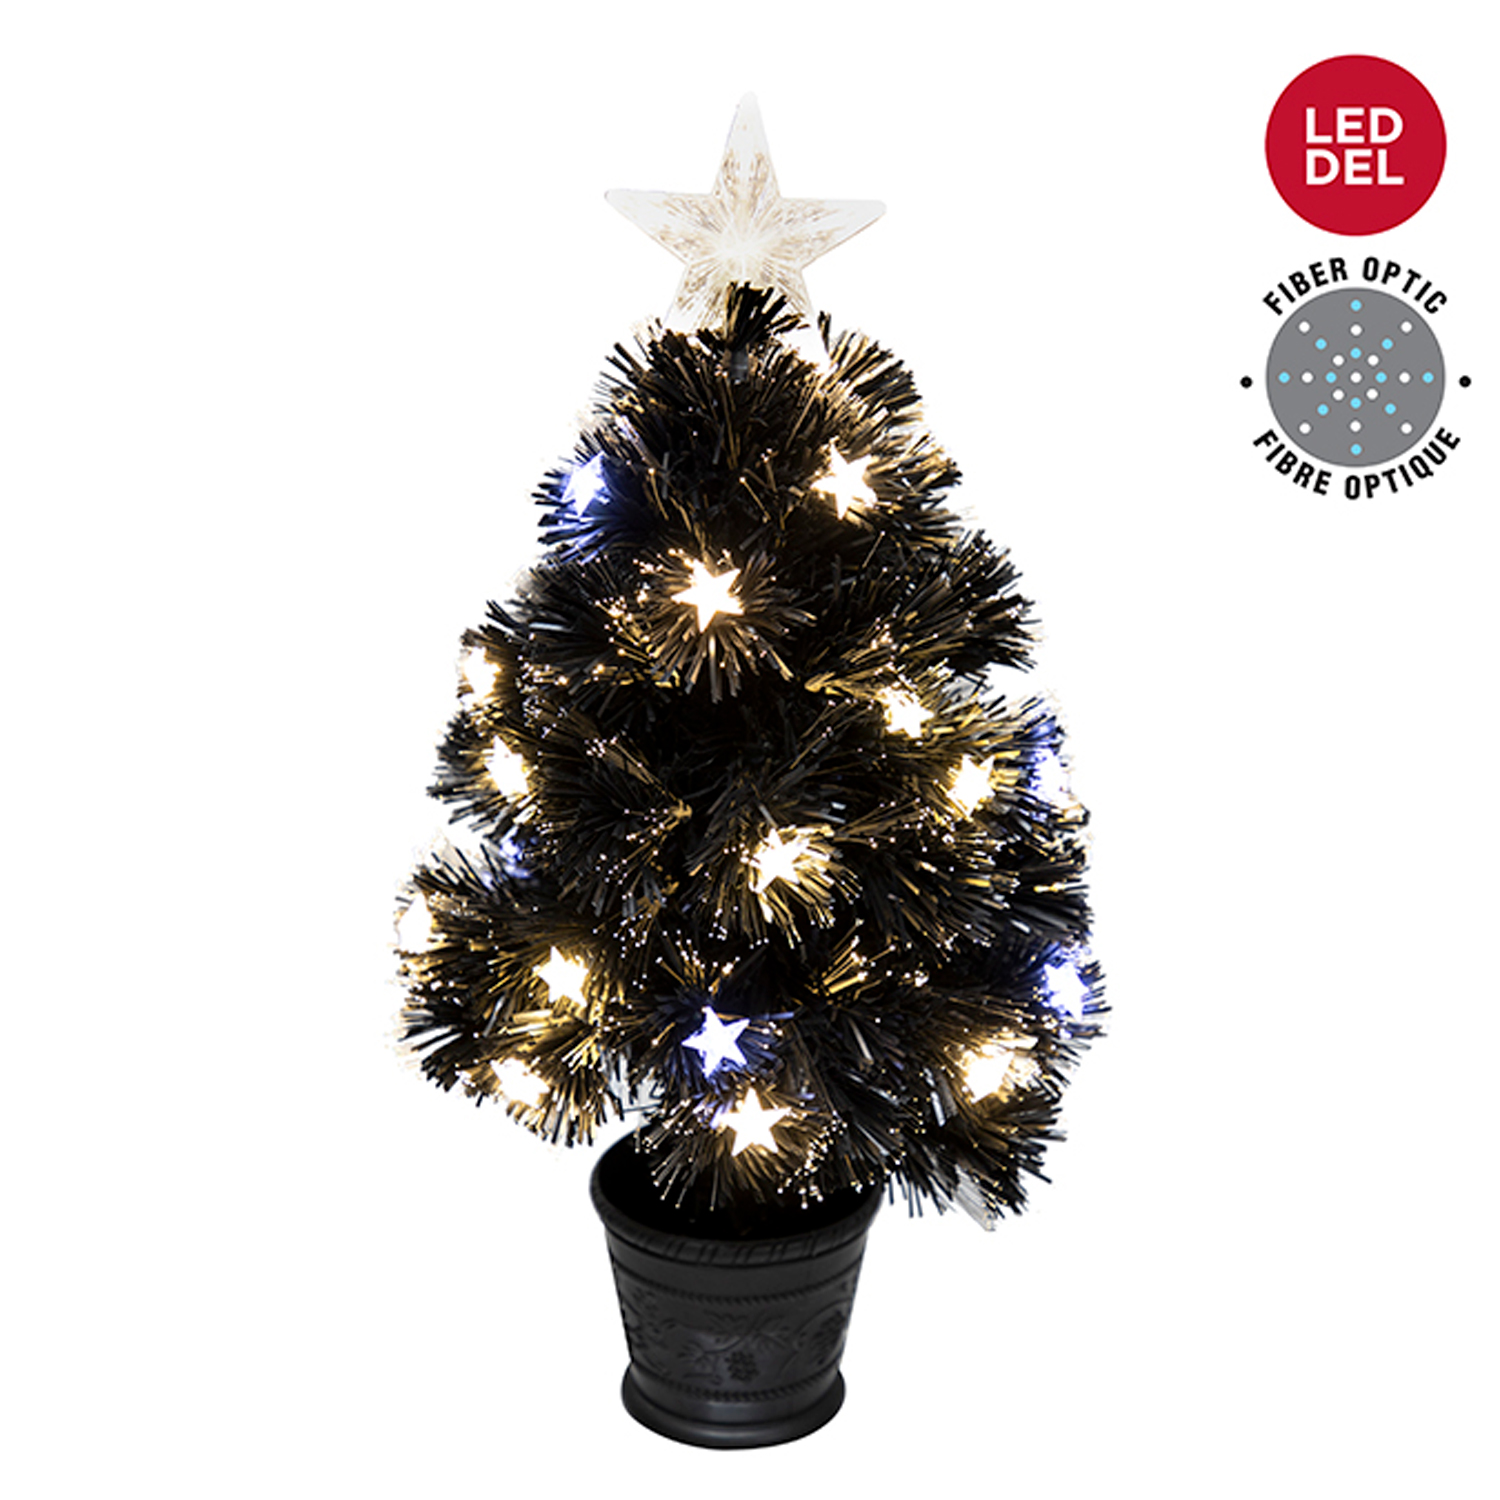 Danson - Fiber optic potted Christmas tree with star top